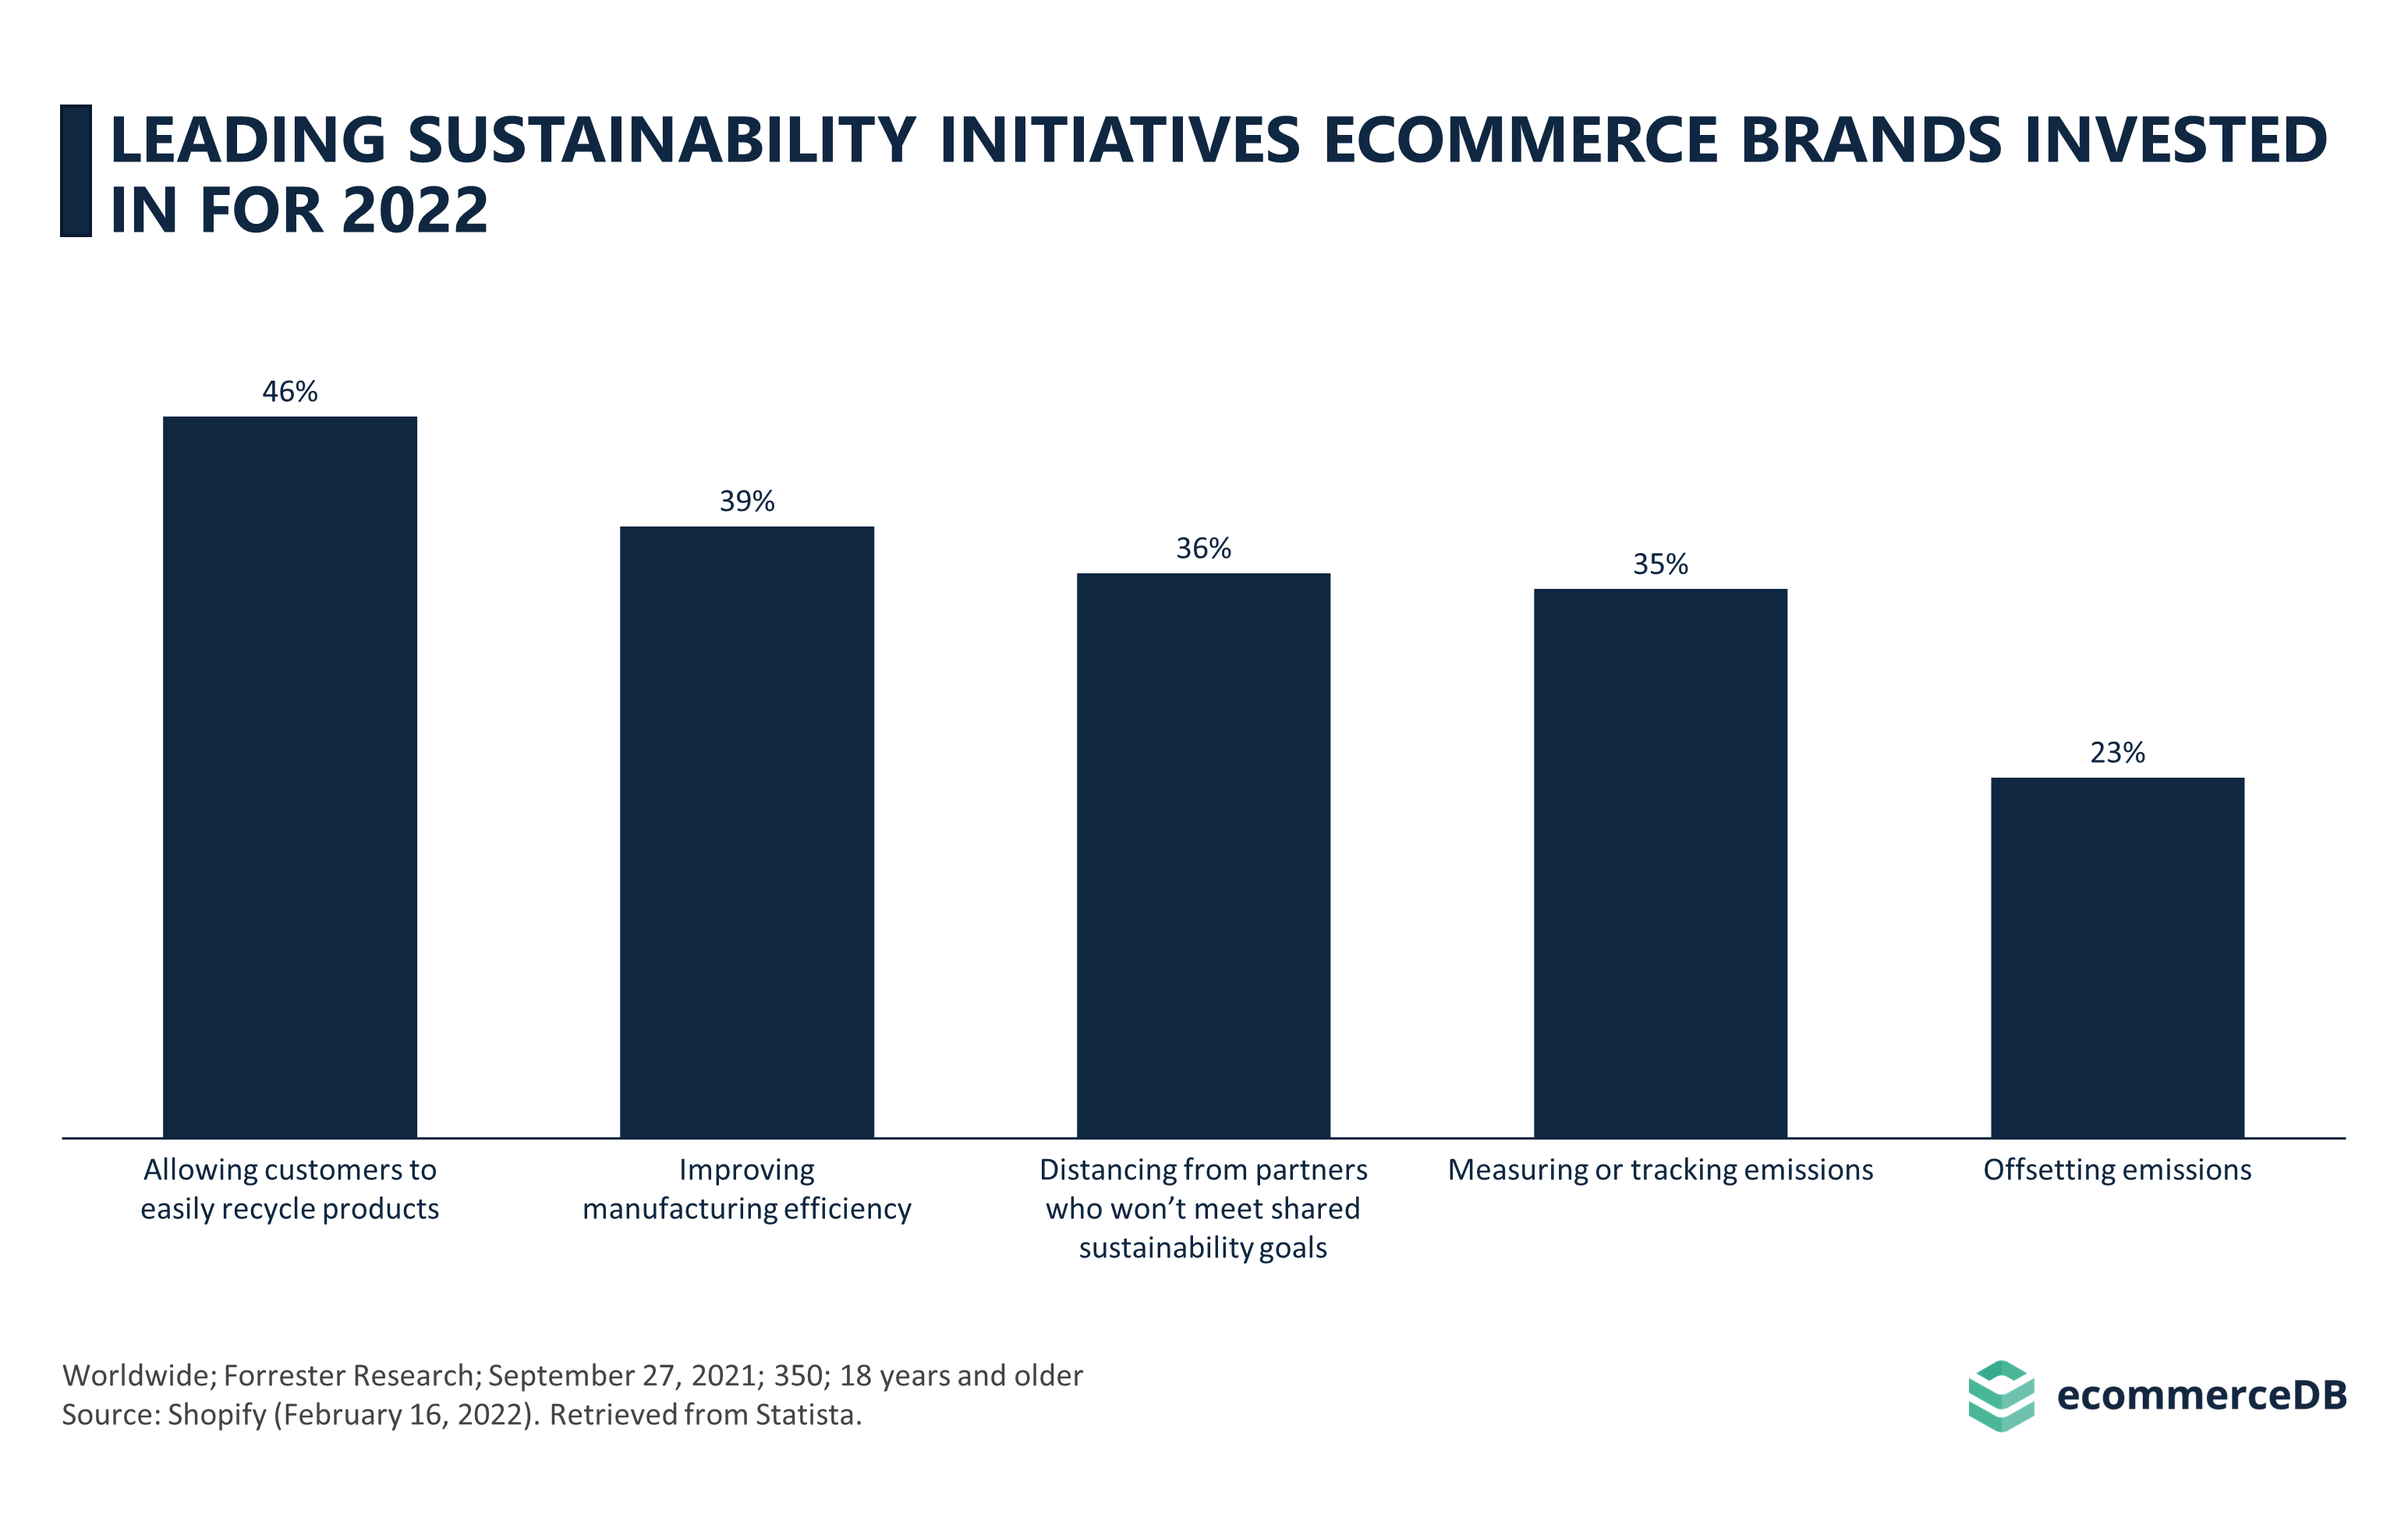 Leading sustainability initiatives e-commerce brands are investing in for 2022